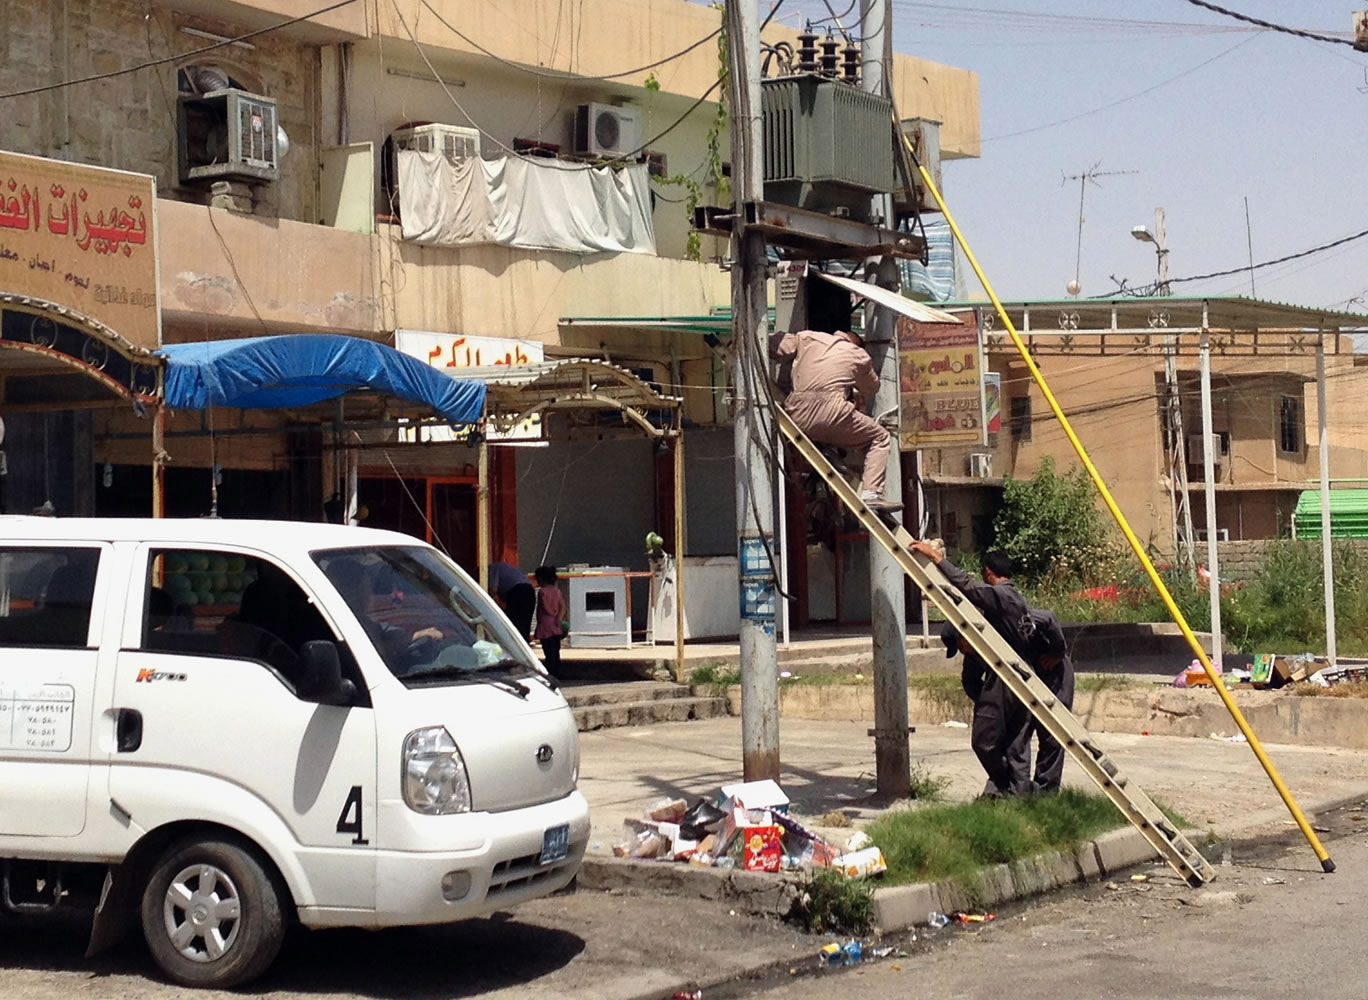 Iraqi electricity company workers repair a transformer in the northern city of Mosul, Iraq, ten days after the Islamic State of Iraq and the Levant took over the countryu2019s second largest city.